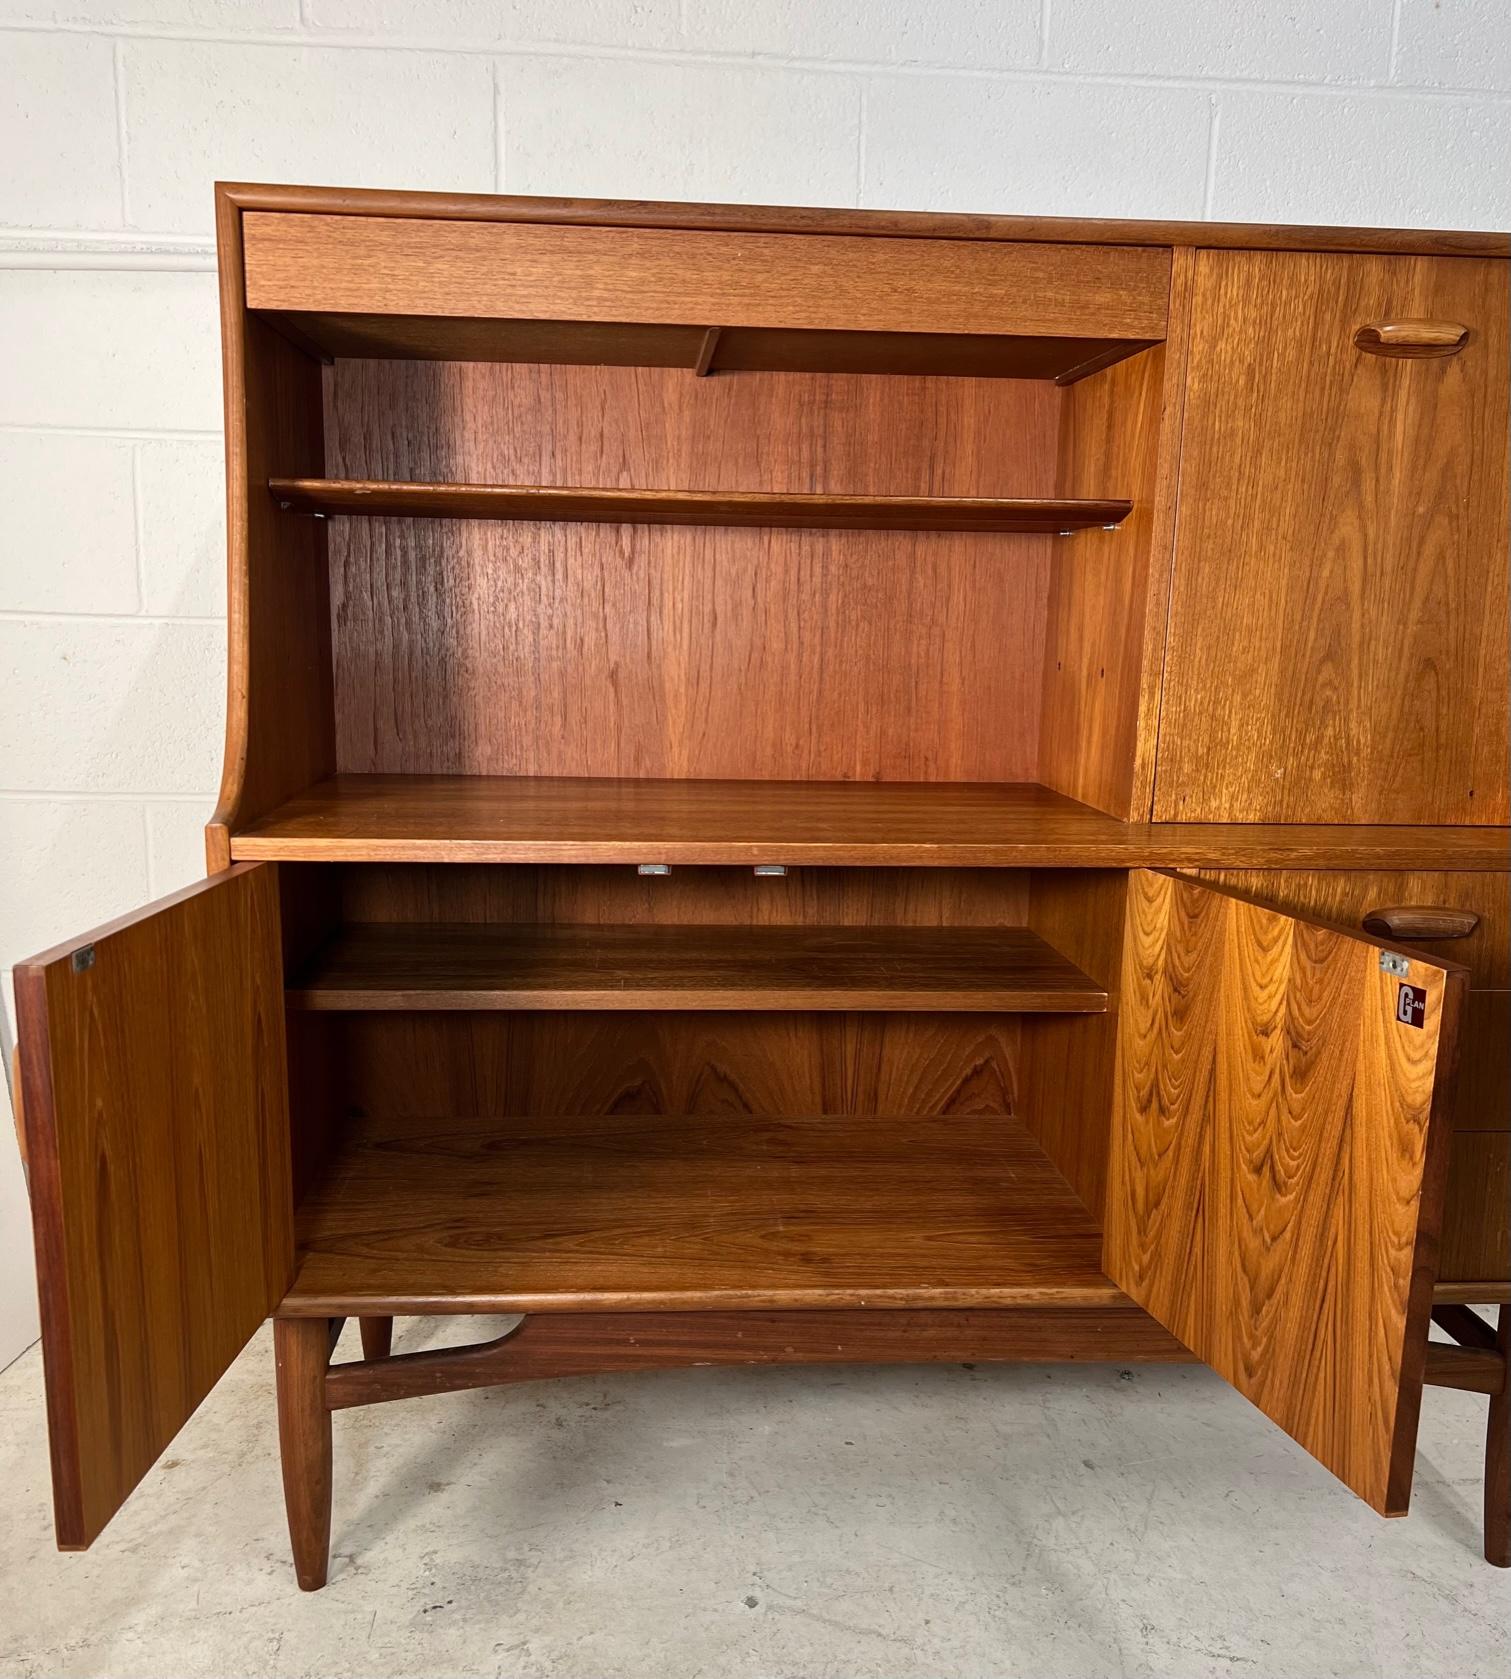 Mid century modern versatile teak highboard or server by G Plan. Featuring a drop down cabinet that can be used as a small desk and a drawer for silver ware at the top.
Three drawers and a cabinet with removable shelf at the bottom.

Condition: Has